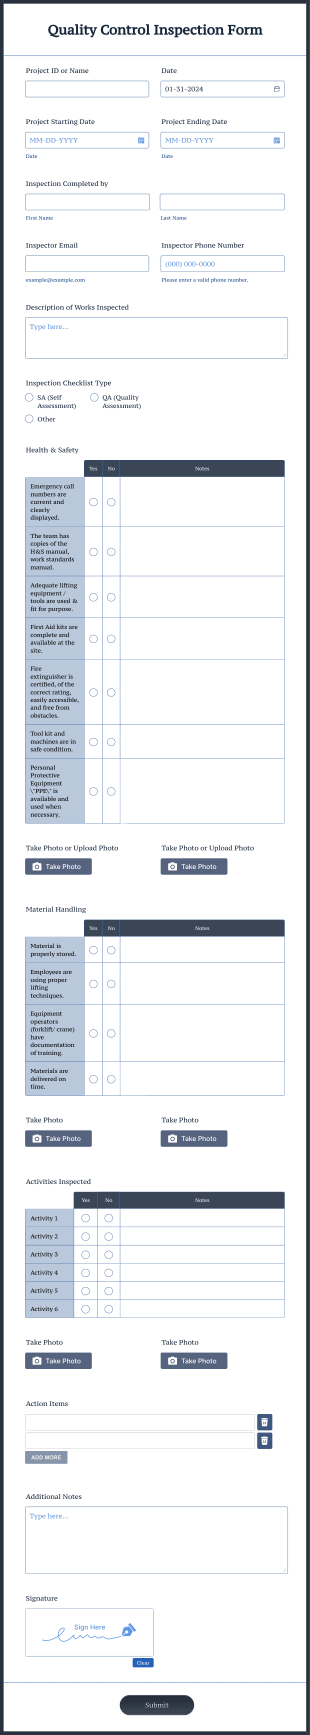 Quality Control Inspection Form Template